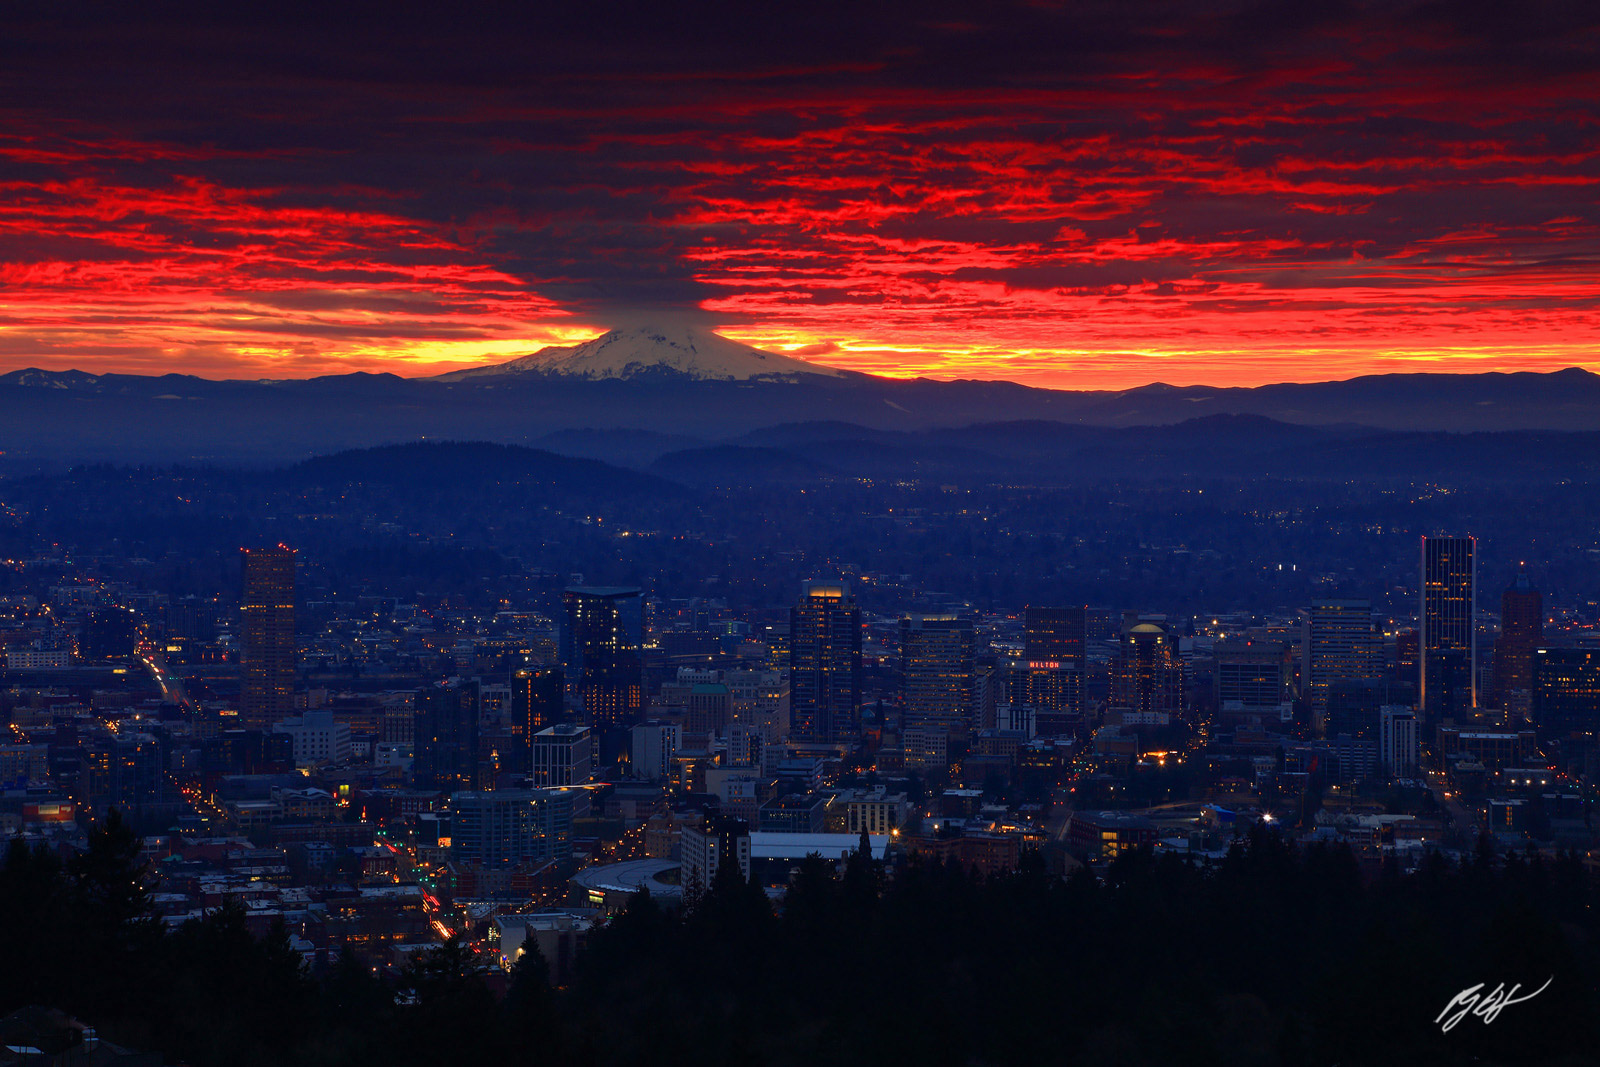 Sunrise over Portland with Mt Hood from the Pittock Manson in Portland Oregon